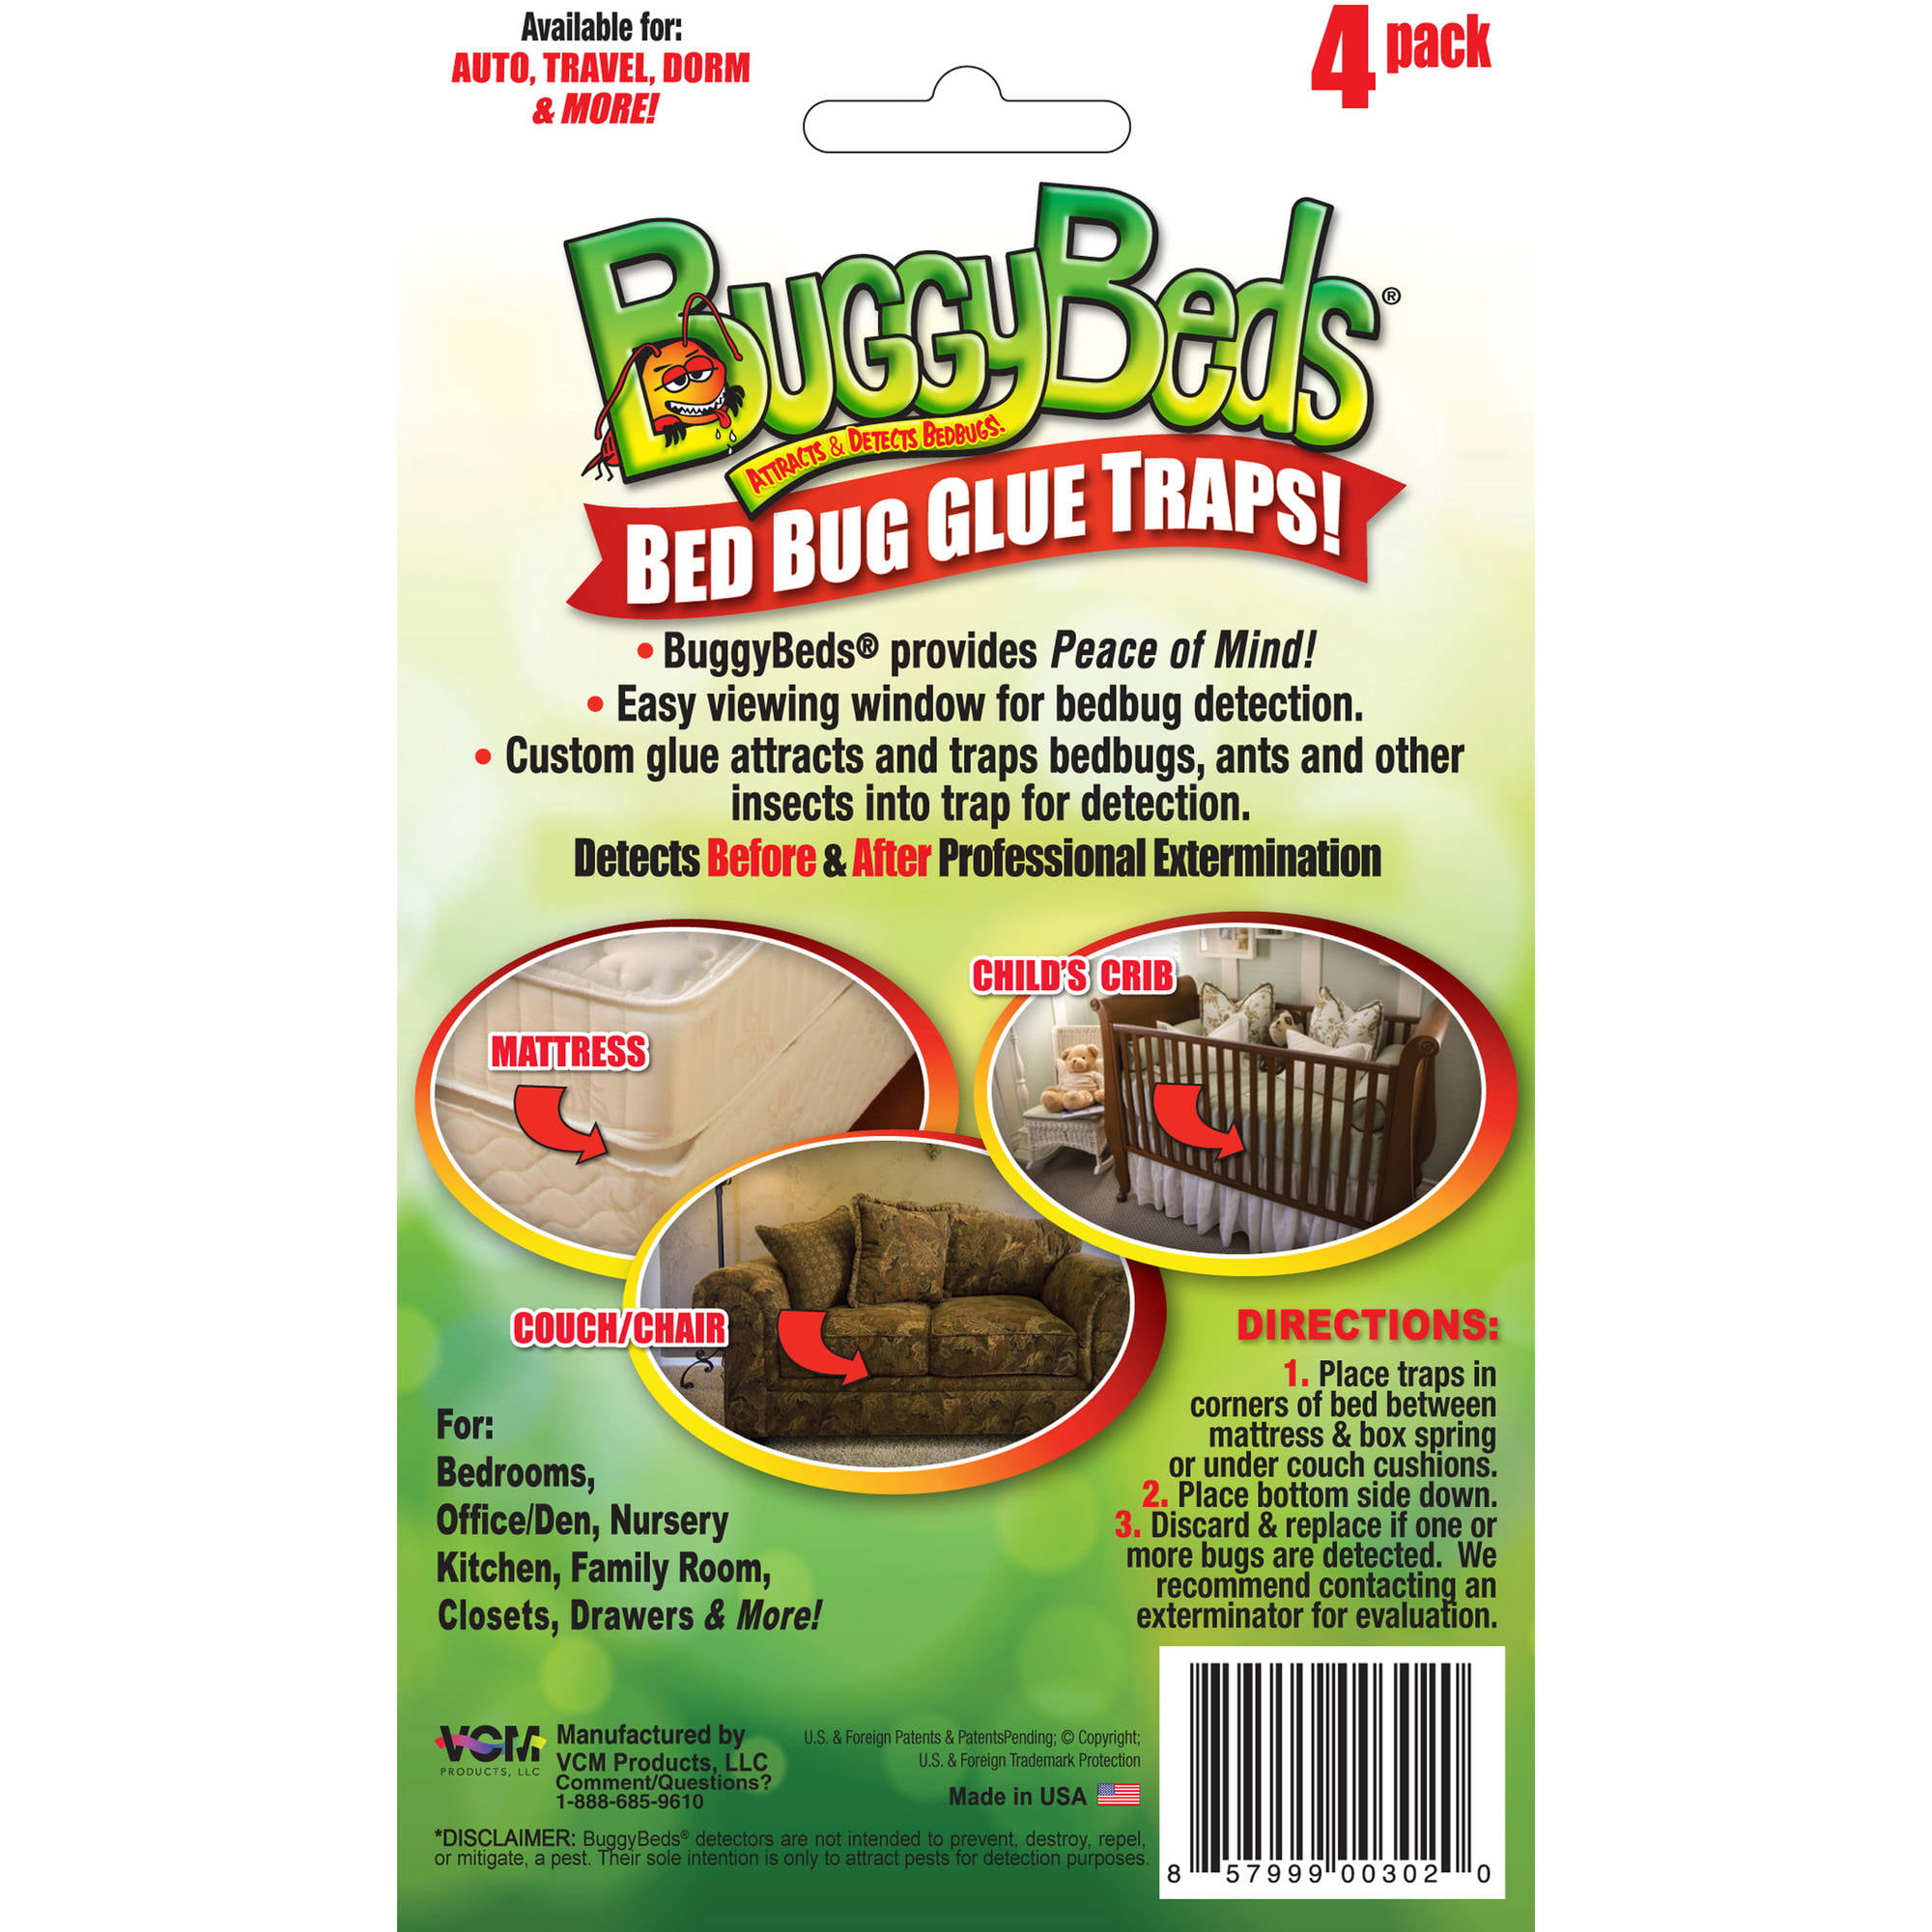 A better bedbug trap made from household items for about $1 (w/ Video)